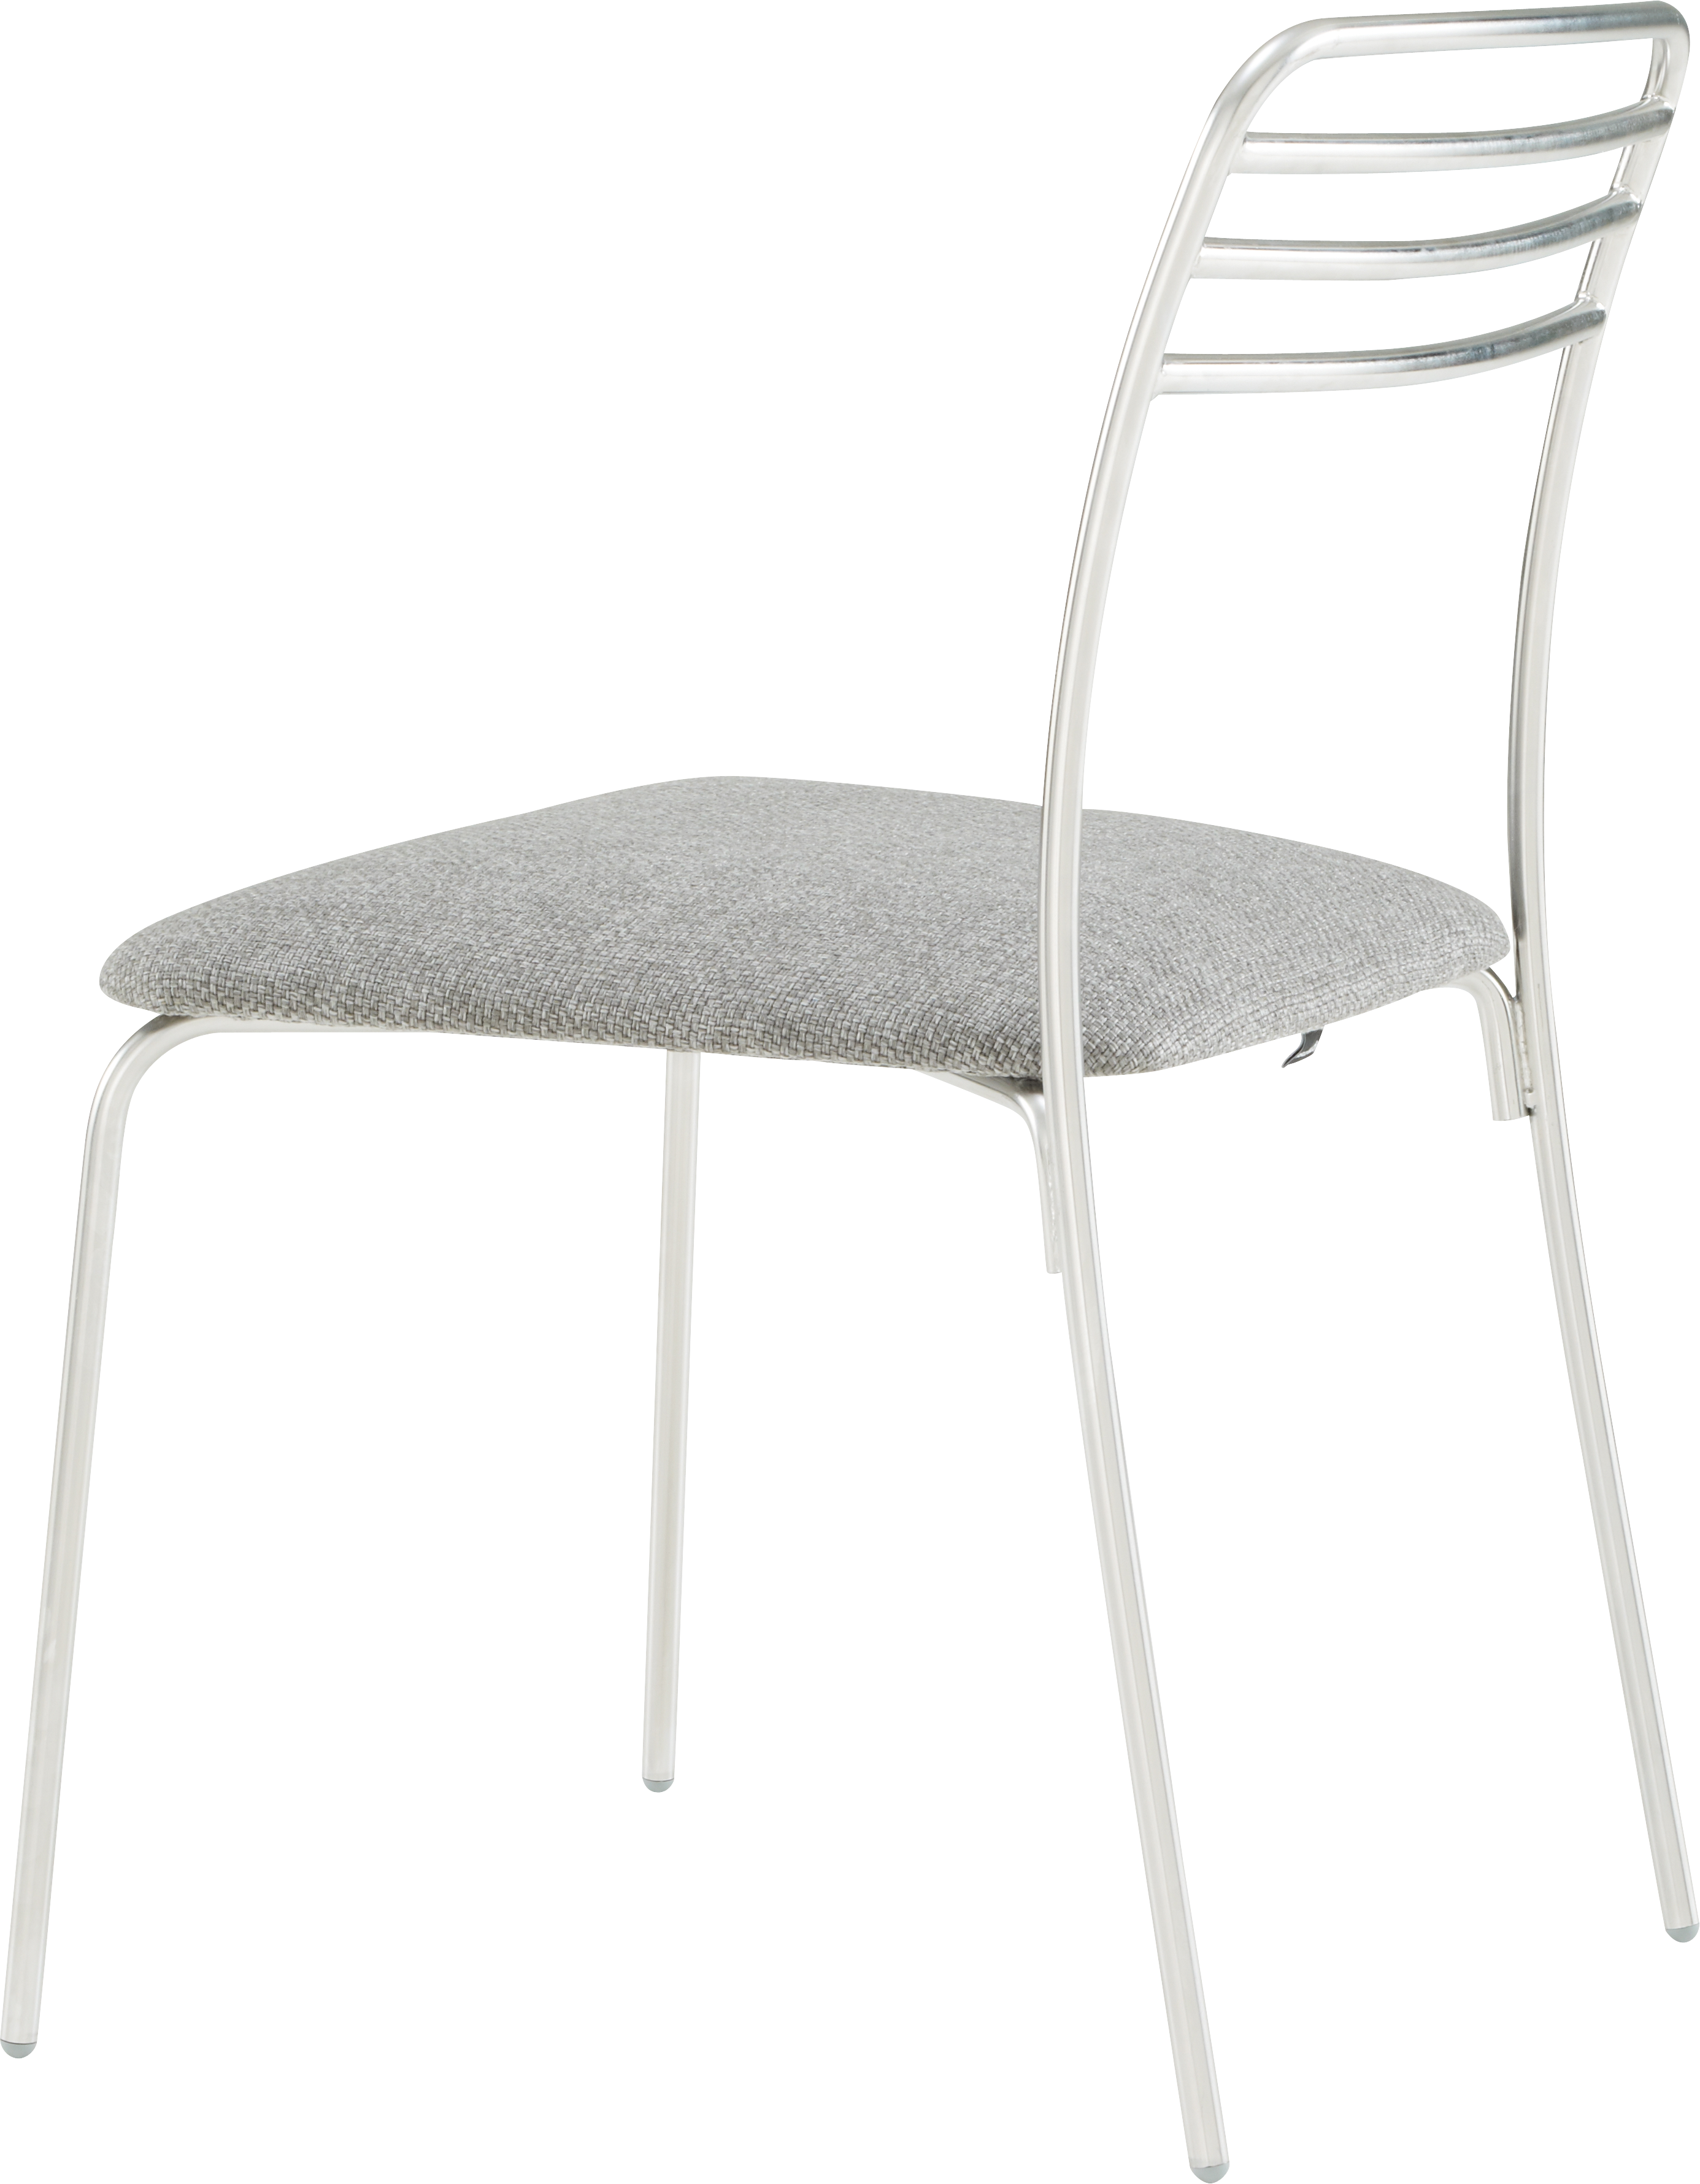 Chair PNG image transparent image download, size: 2771x3560px